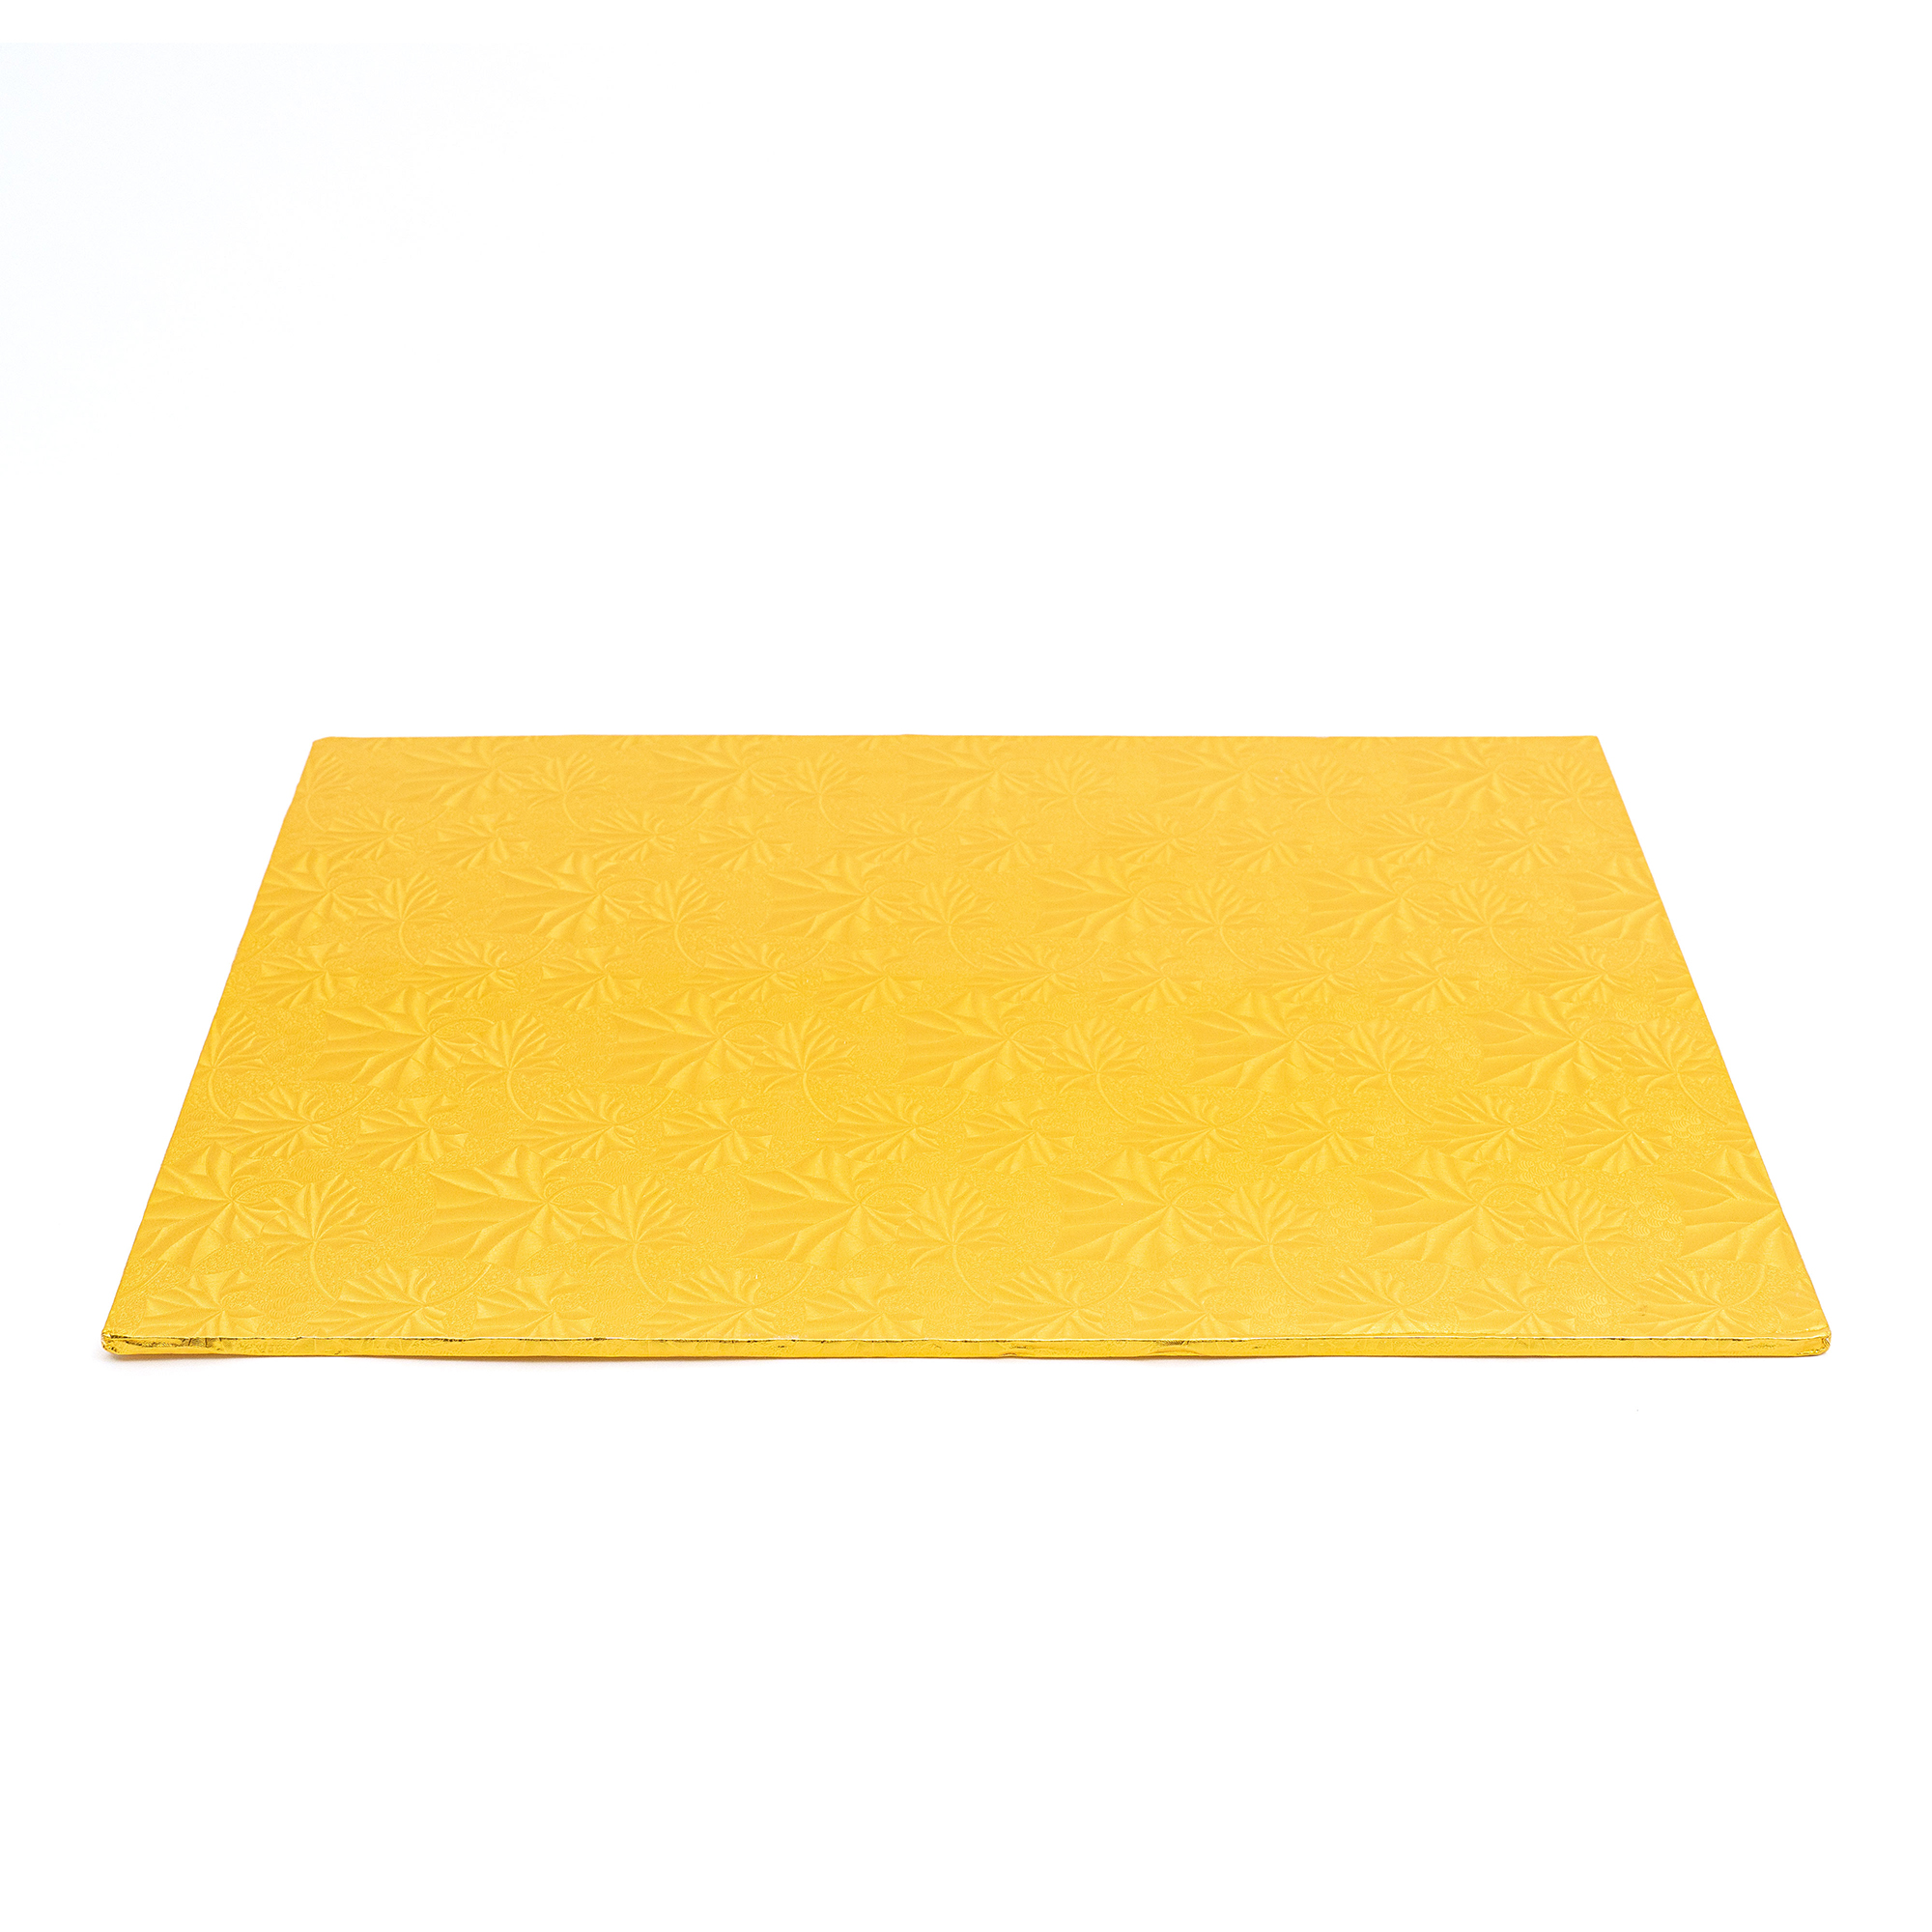 Foil Covered Cake Board ½sheet 5pc/pack - Gold